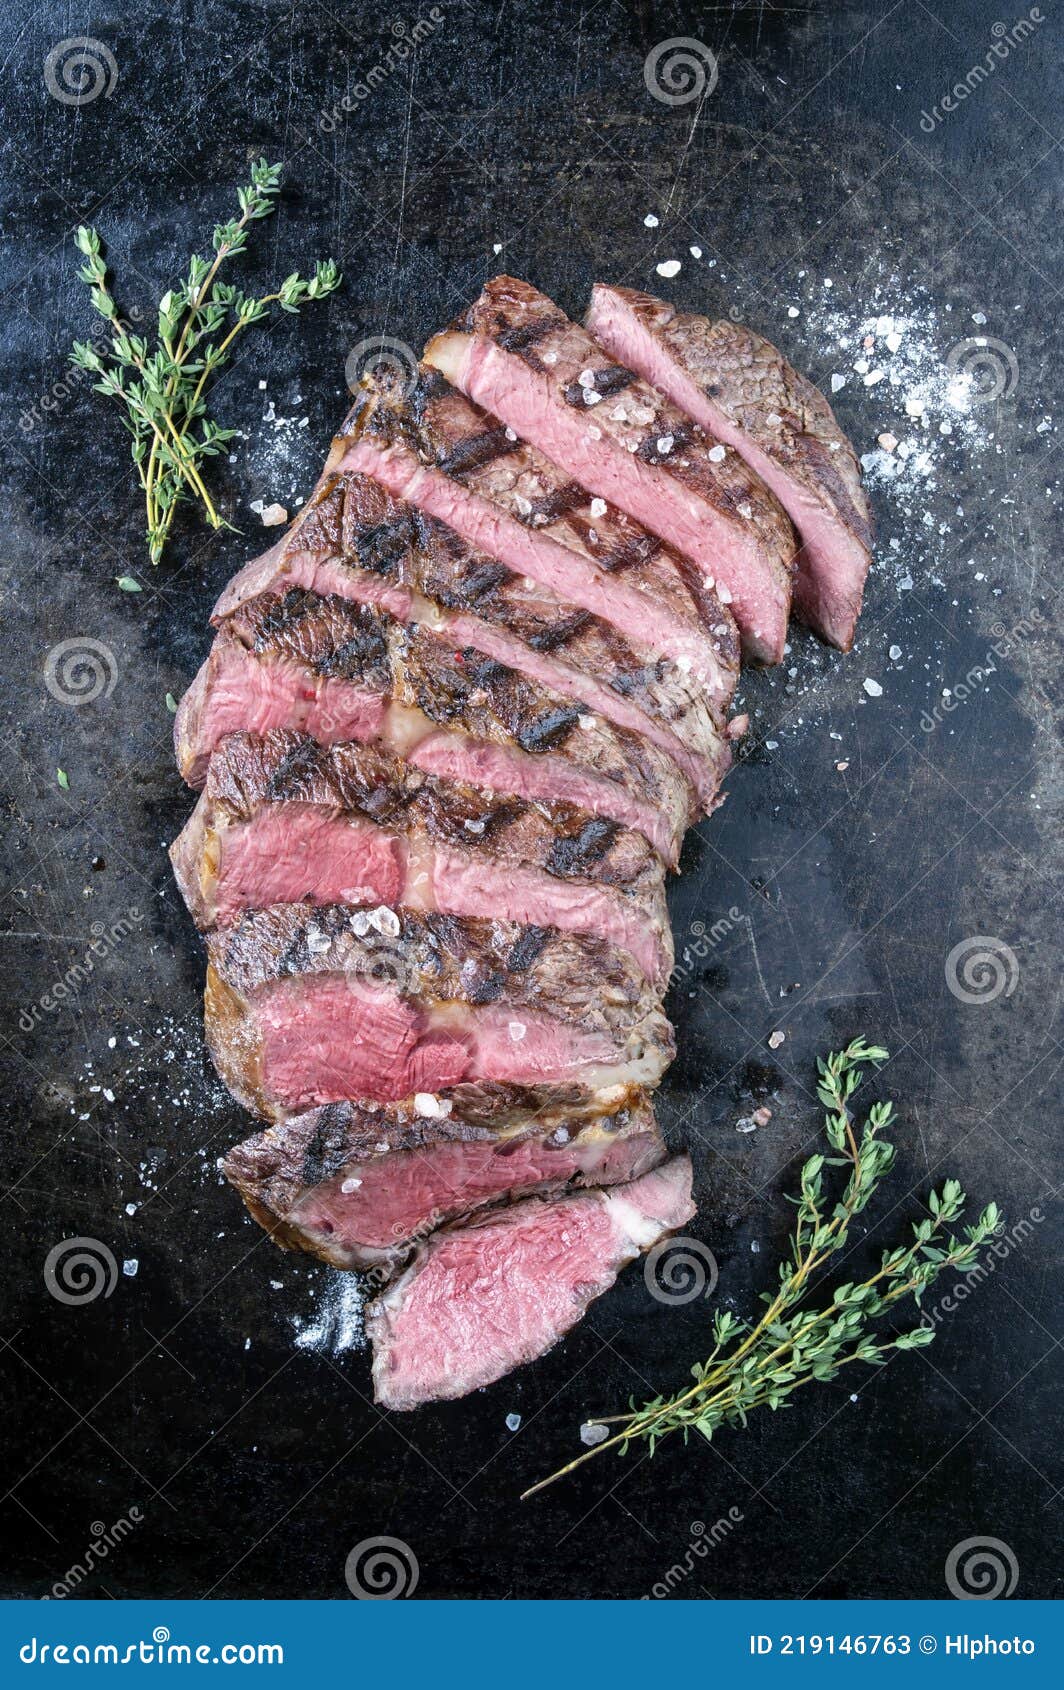 Barbecue Dry Aged Entrecote Double Beef Steak Sliced on a Rustic Board ...